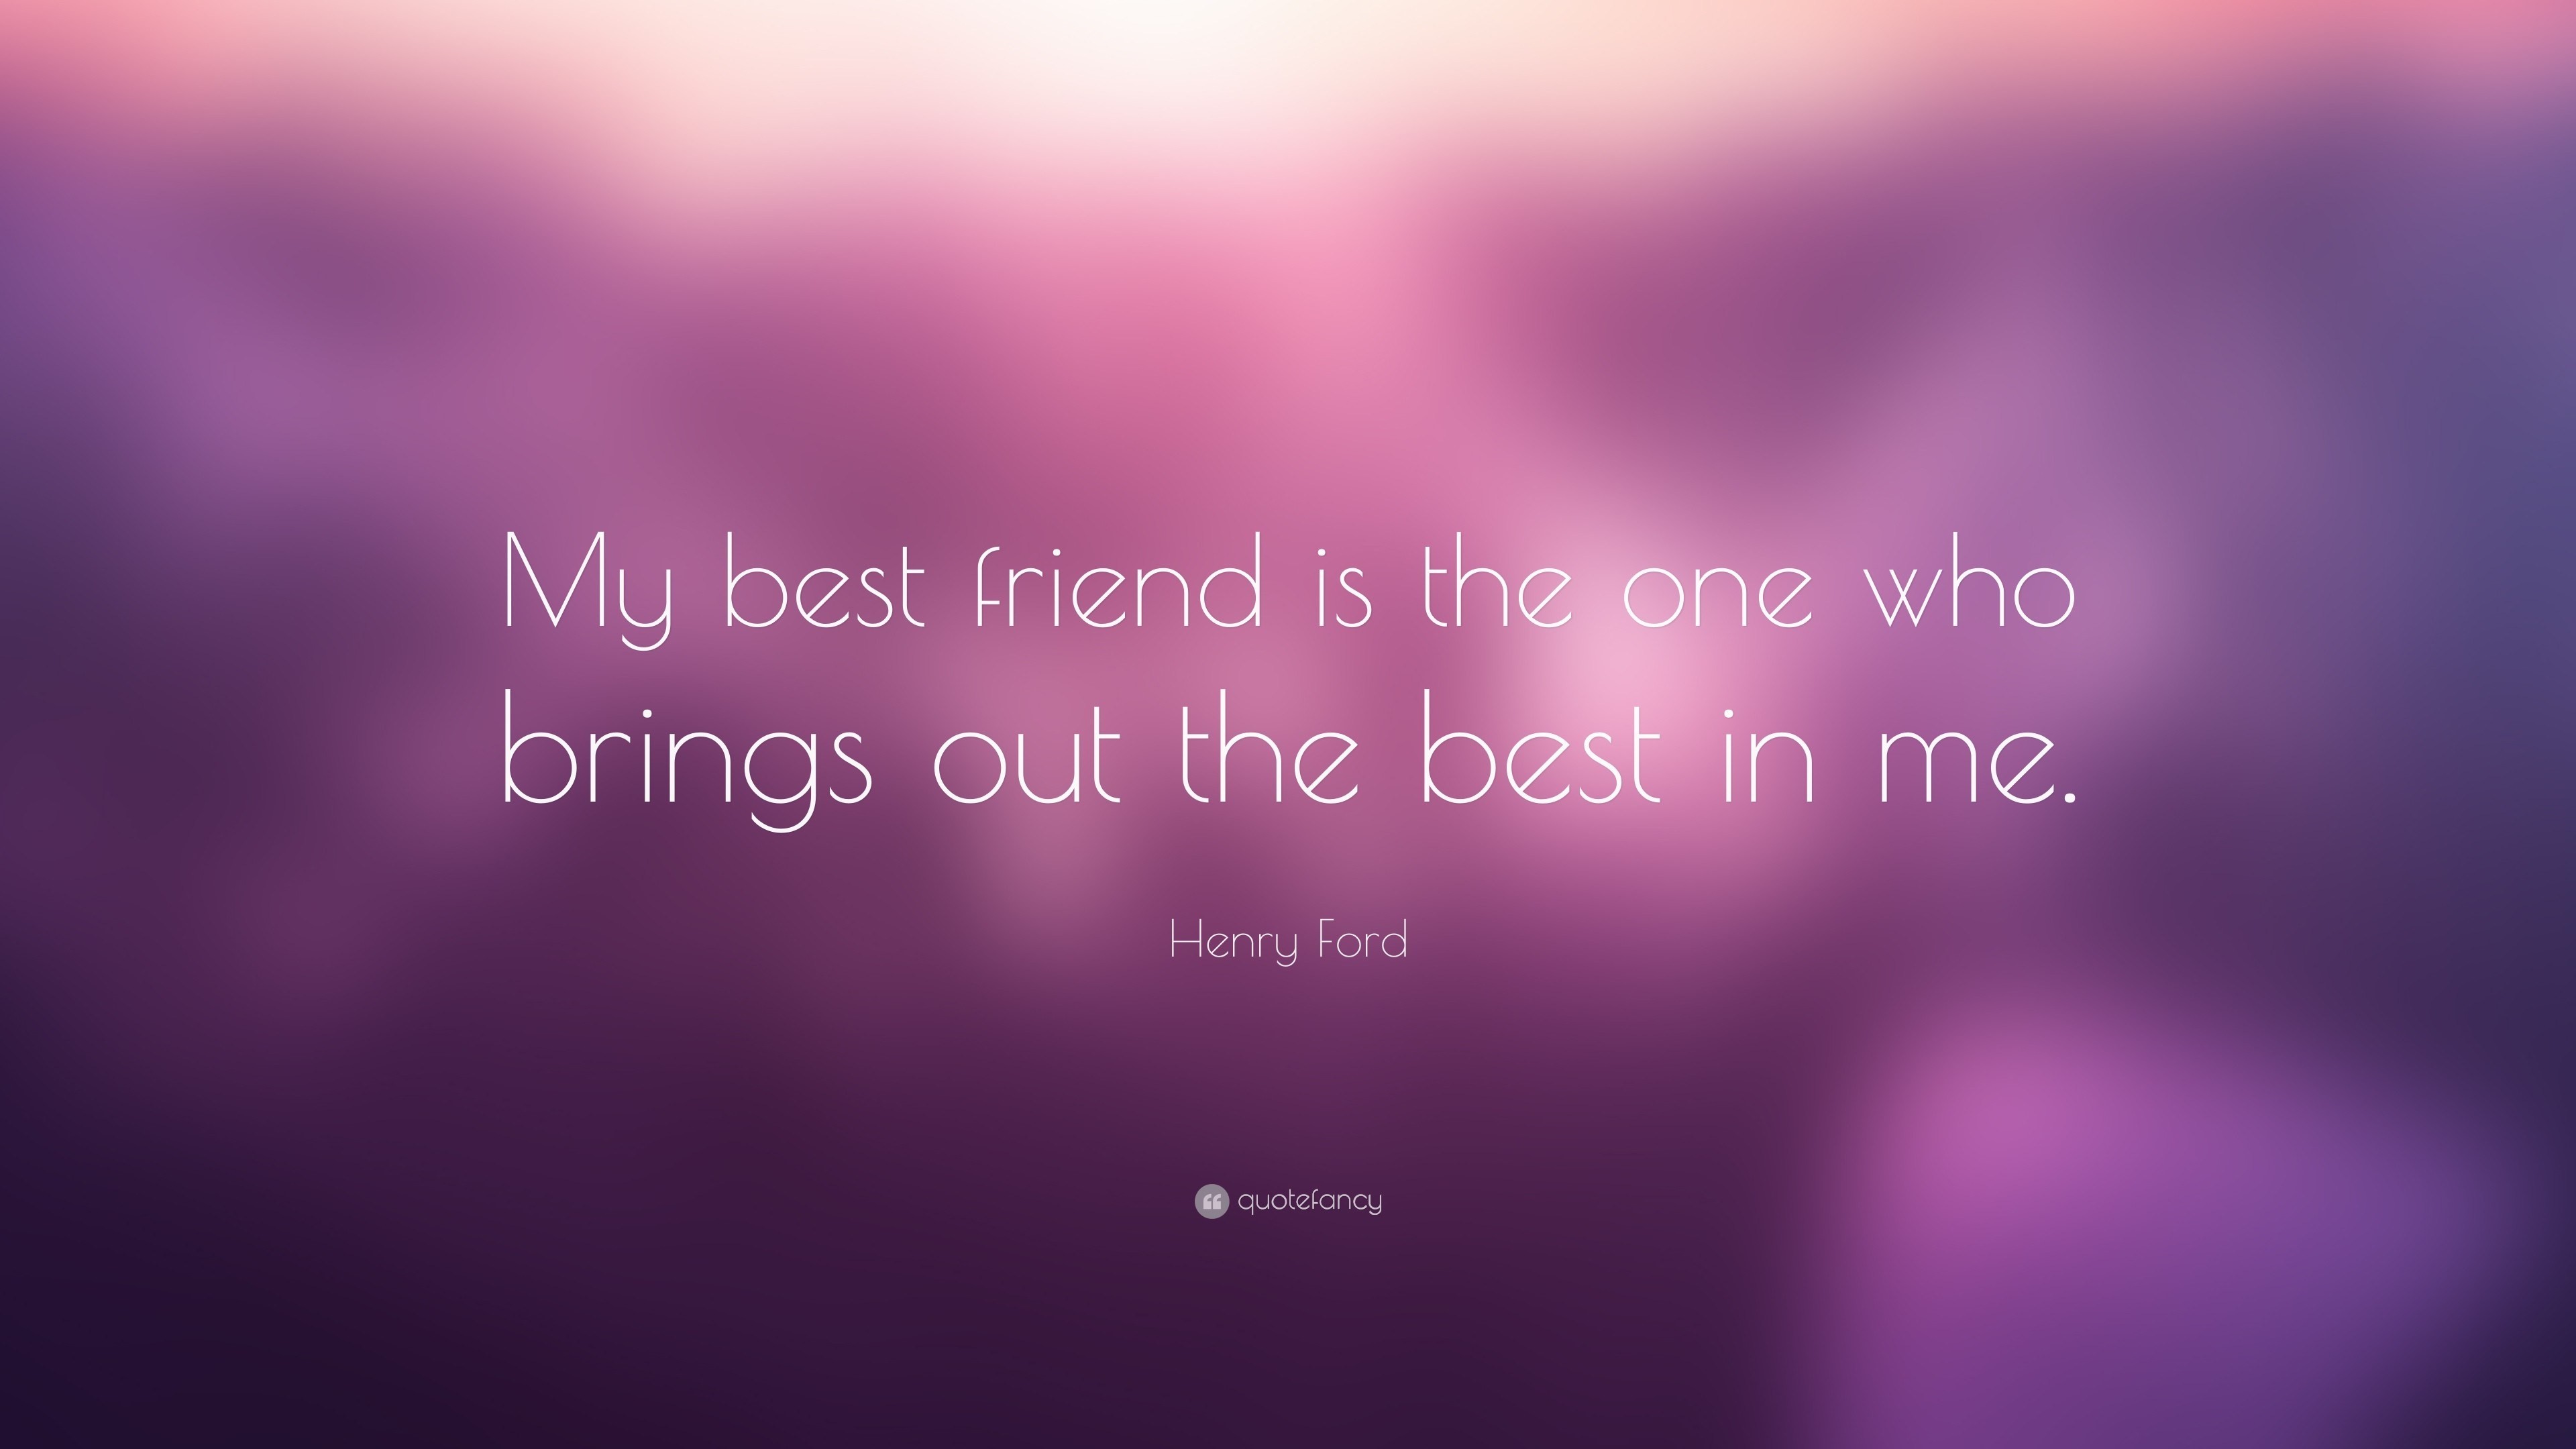 3840x2160 Cool quotes pictures and ideas on carver museum jpg 600x337 Cool bff  wallpapers